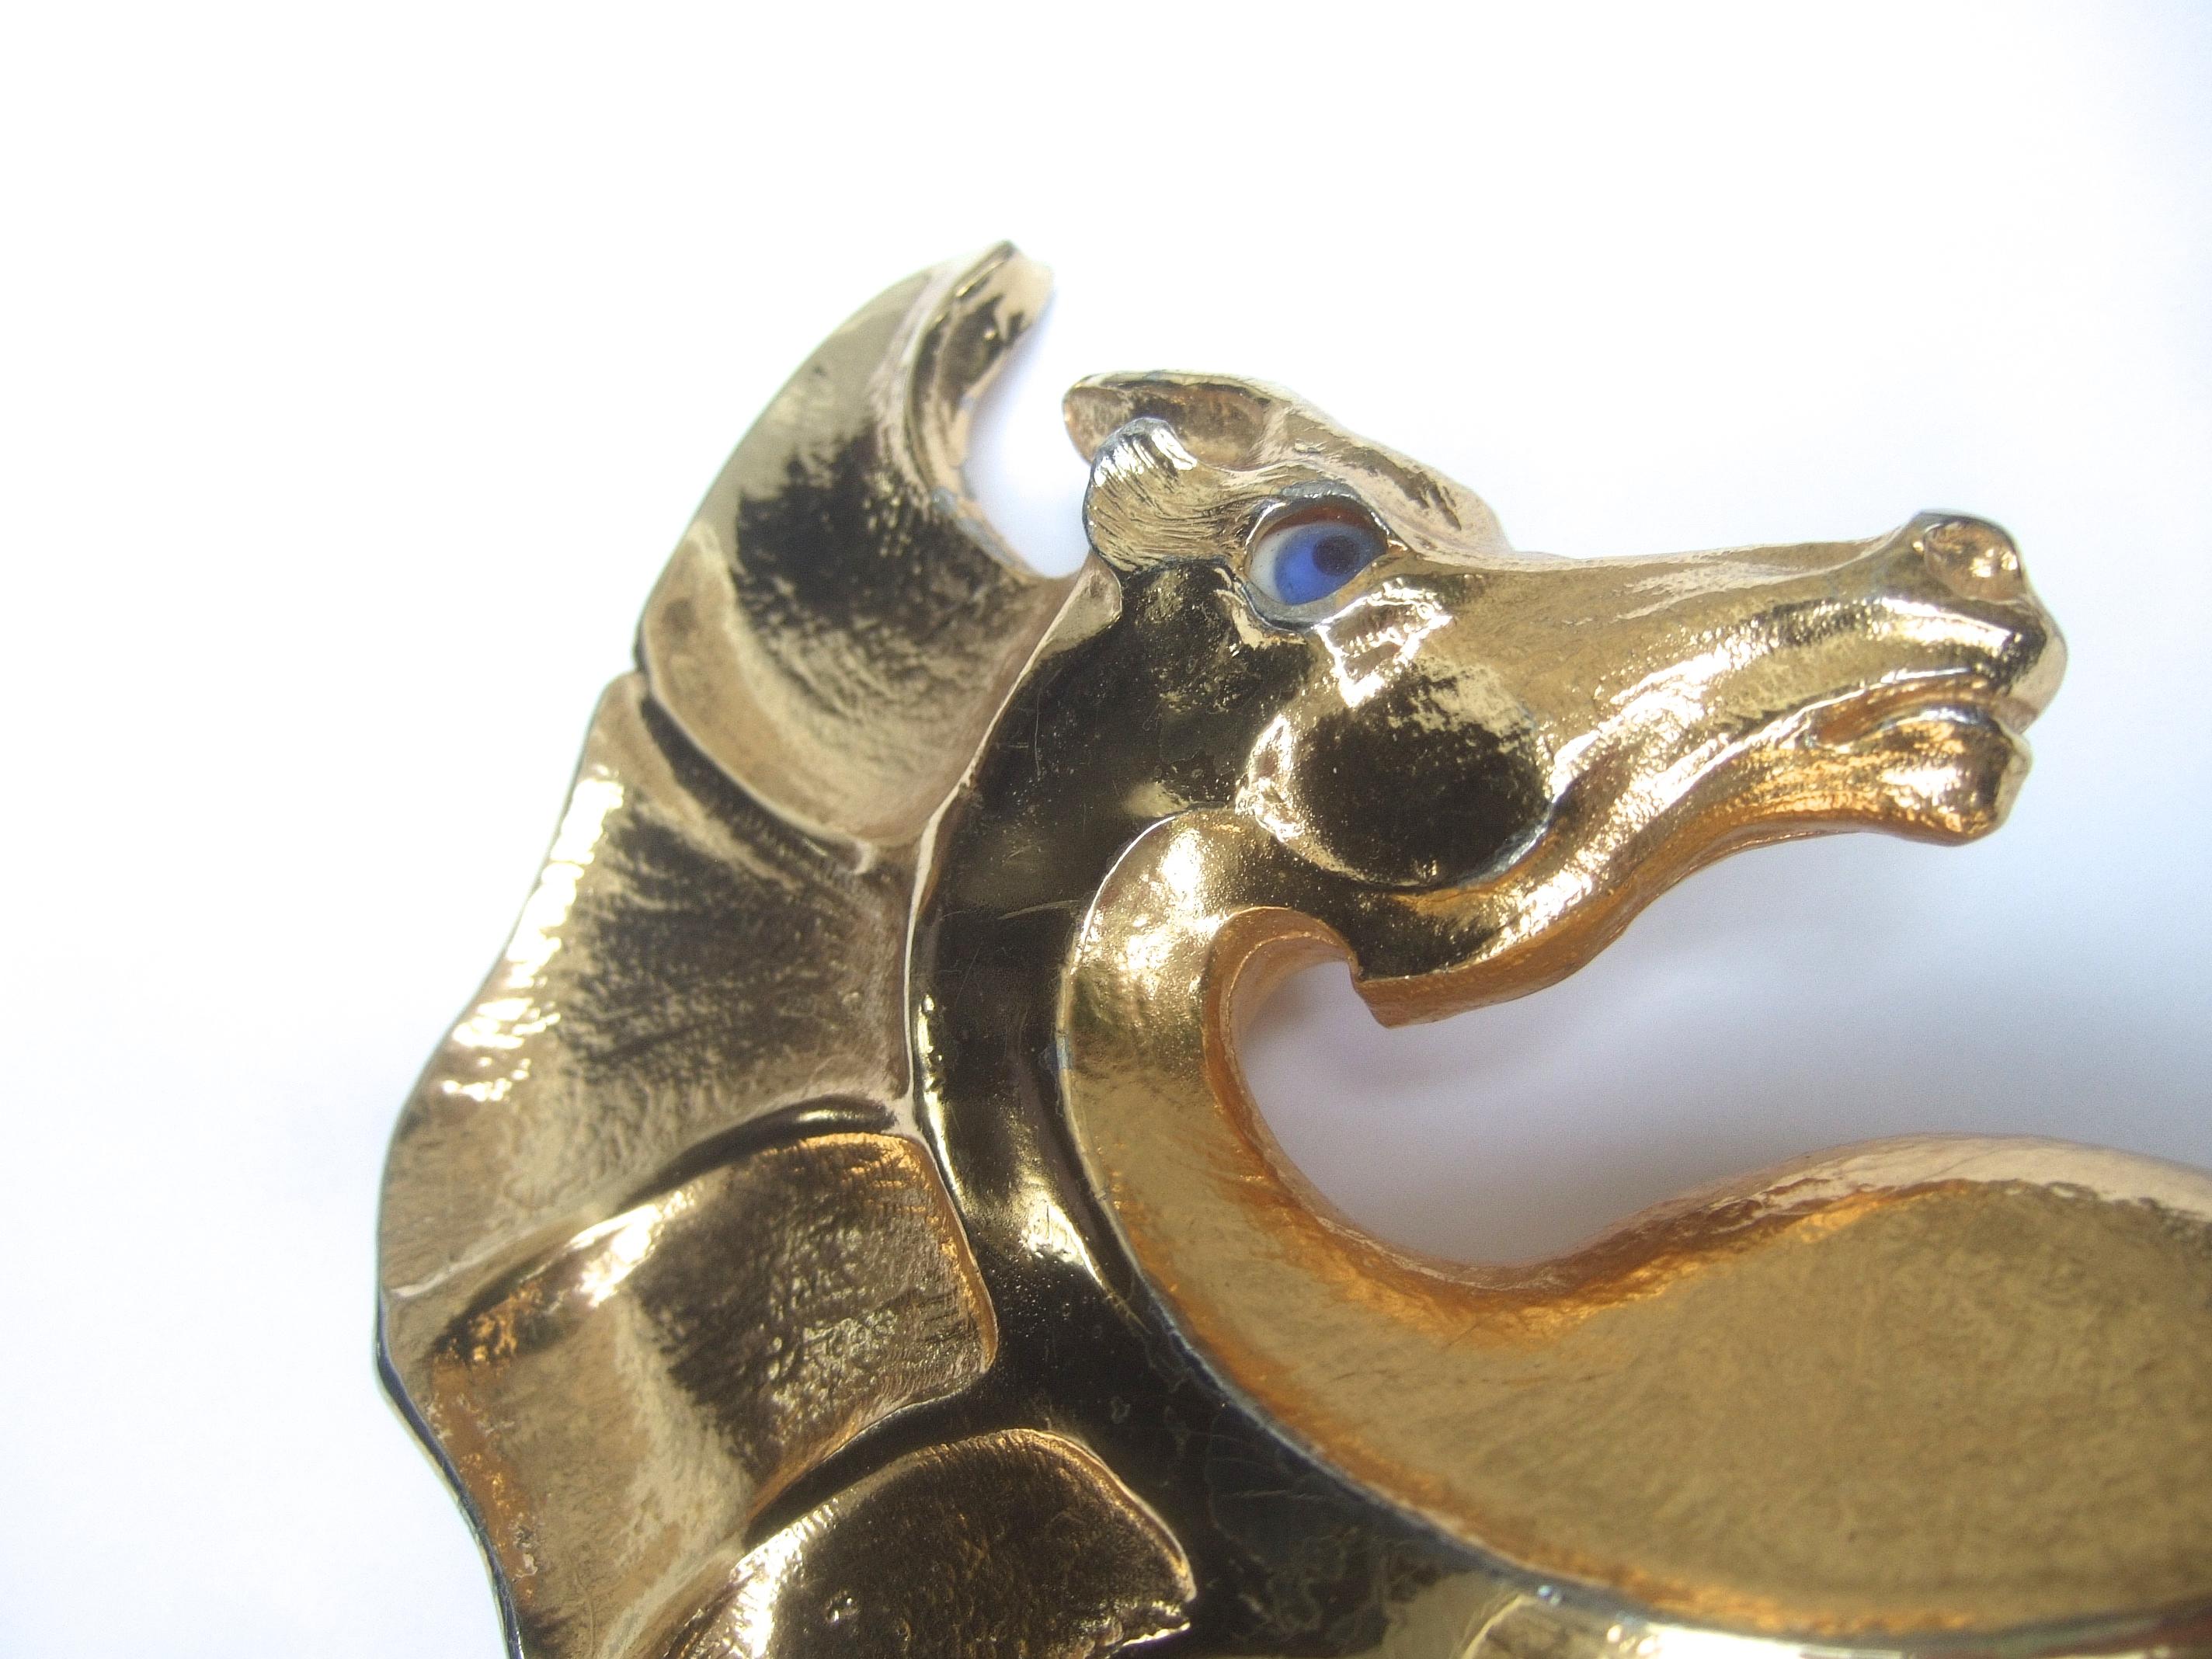 Christopher Ross Rare Massive 24k Gold Plated Seahorse Belt Buckle c 1980s In Excellent Condition For Sale In University City, MO